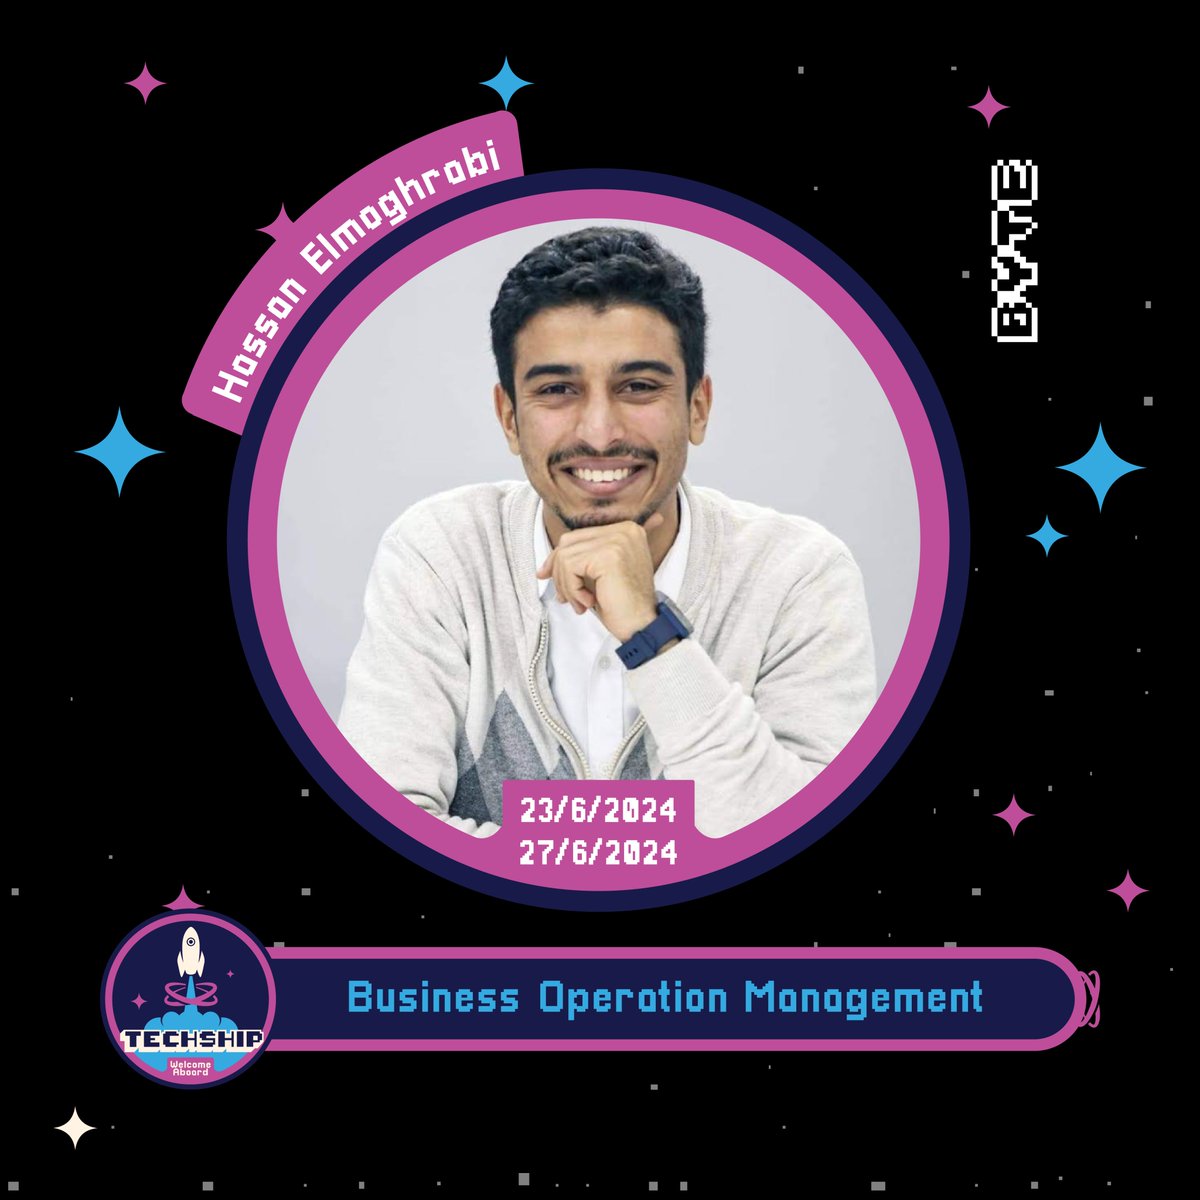 TechShip 6th Trip 🚀
Business Operation Management
🎙️ Lead by: Hassan Elmoghrabi
🗓️ Date: Sunday 23th of June - Thursday 27th of June
🕟 Time: 4:30 PM - 8:00 PM

#TechShip🚀
Welcome Aboard!
Funded by US State Department through Alumni Engagement Innovation Fund (AEIF)